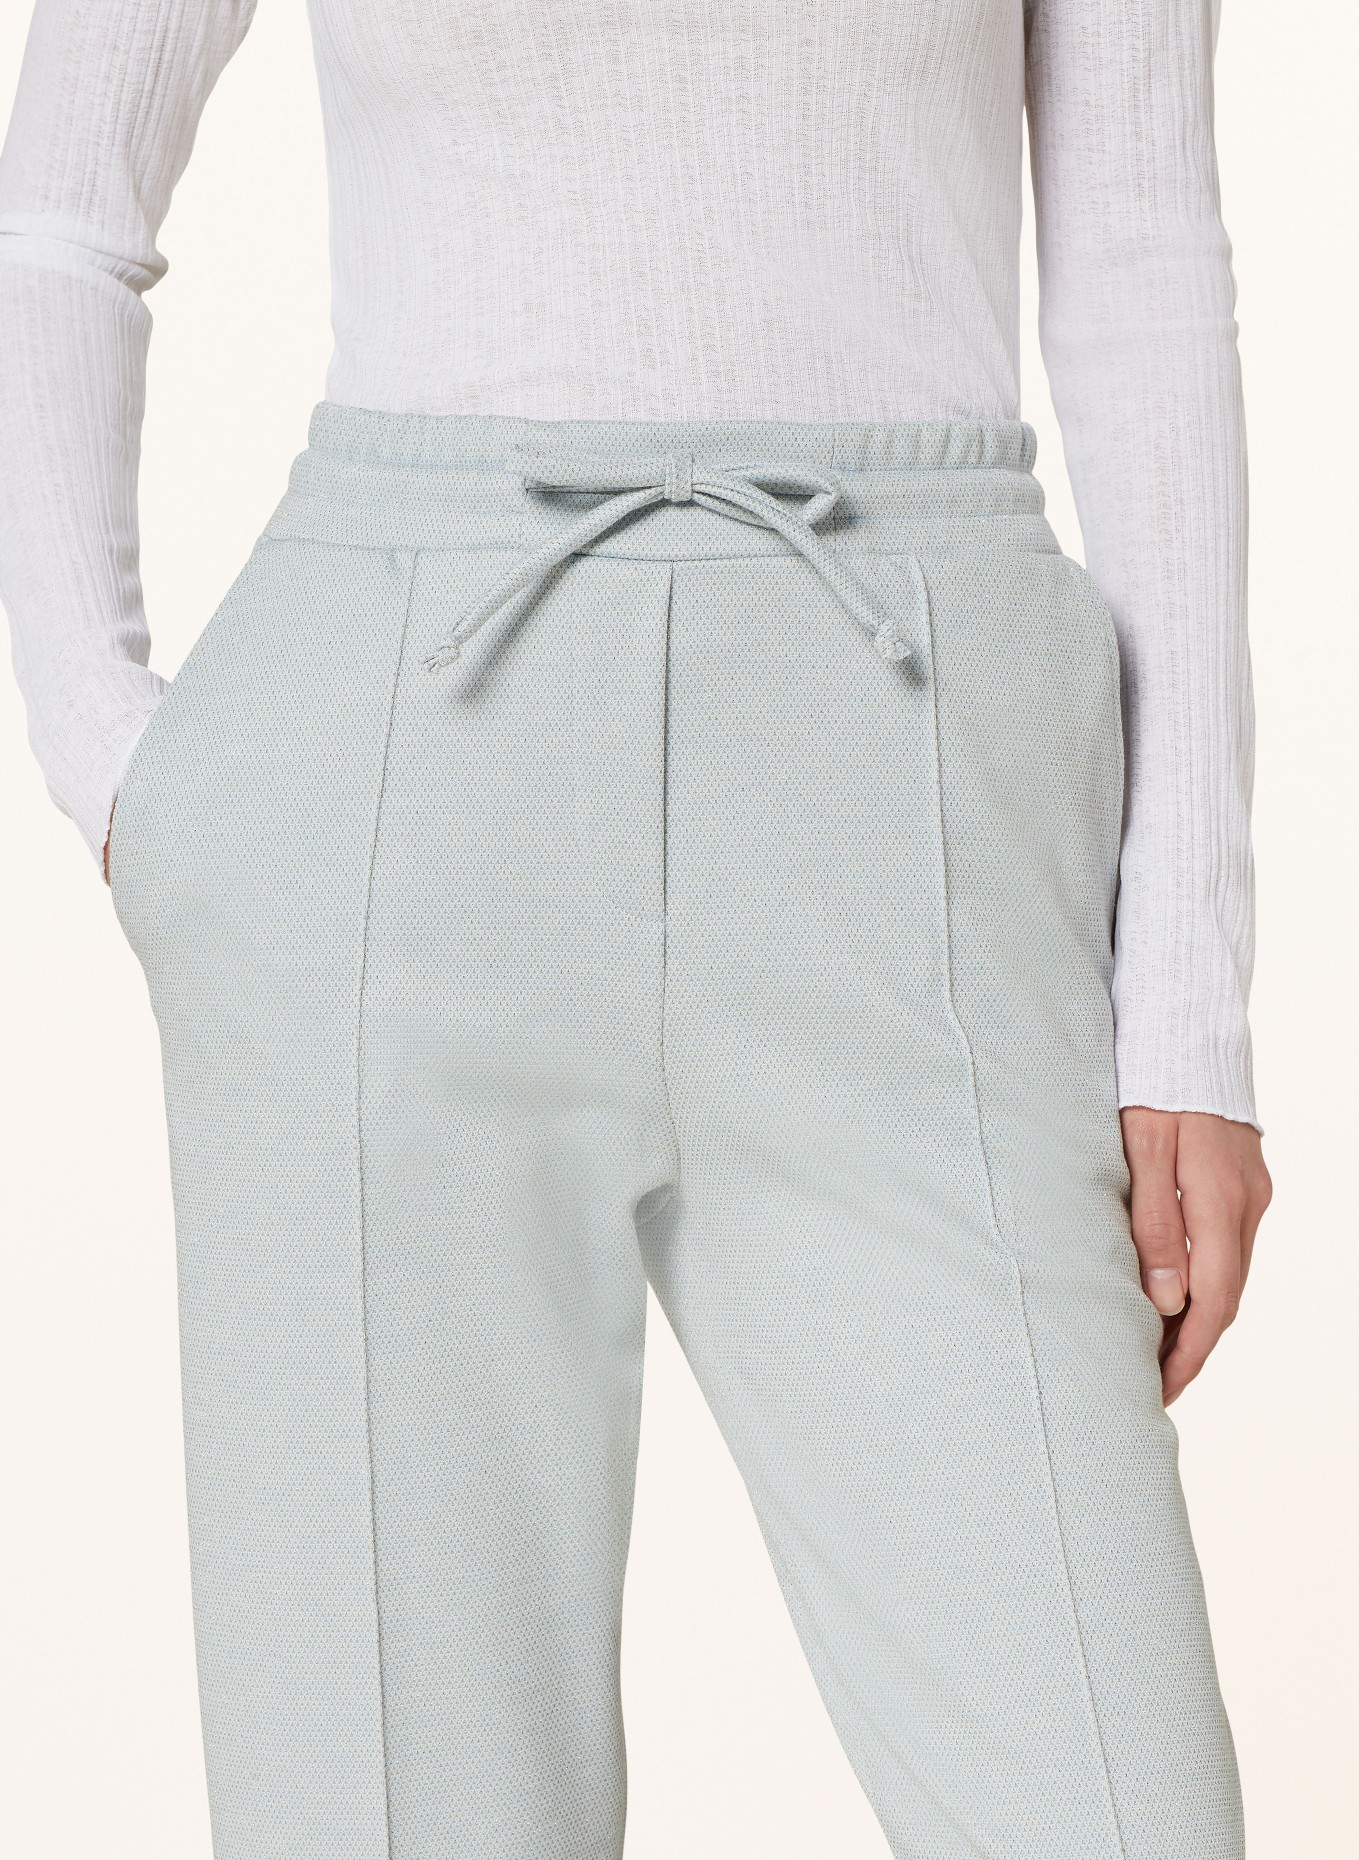 rich&royal Trousers in jogger style with glitter thread, Color: LIGHT BLUE/ GOLD (Image 5)